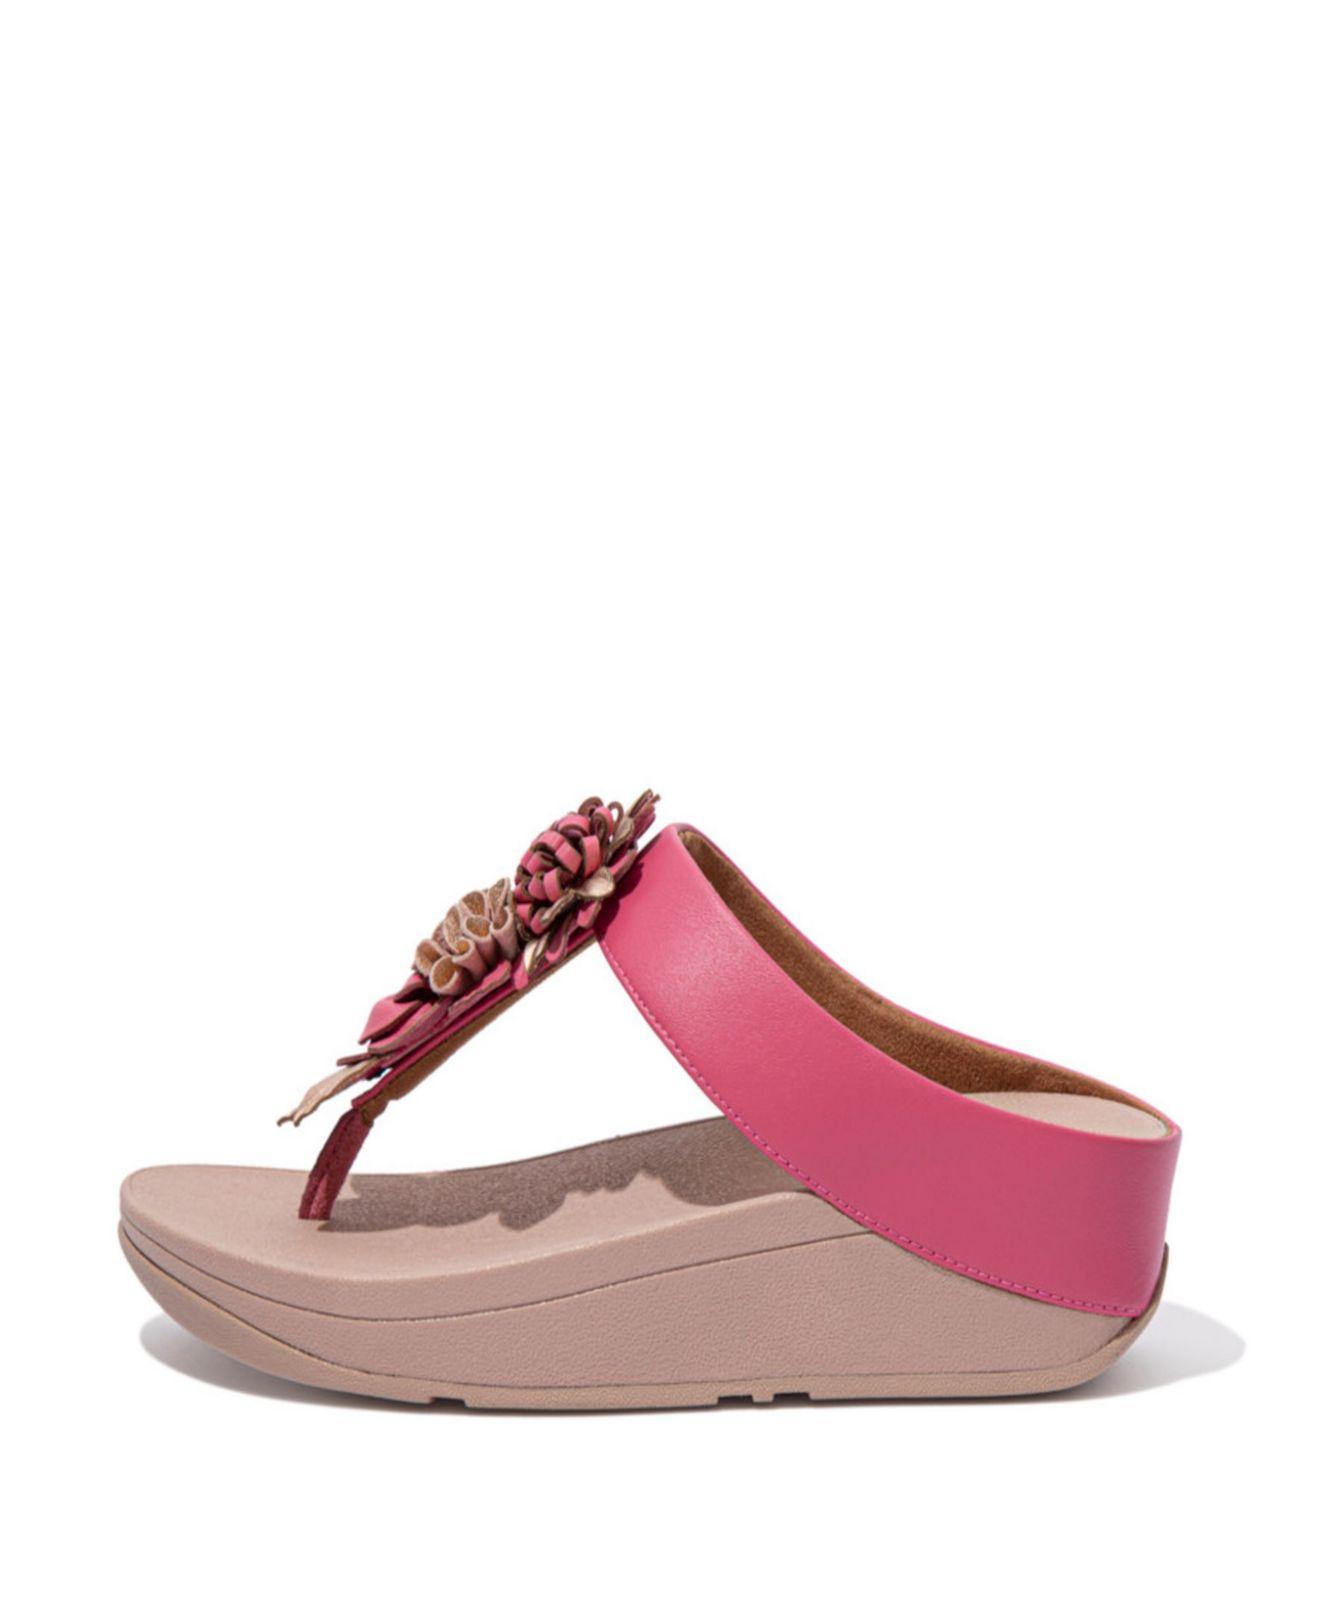 Fitflop Fino Floral Cluster Toe-post Sandals in Pink | Lyst